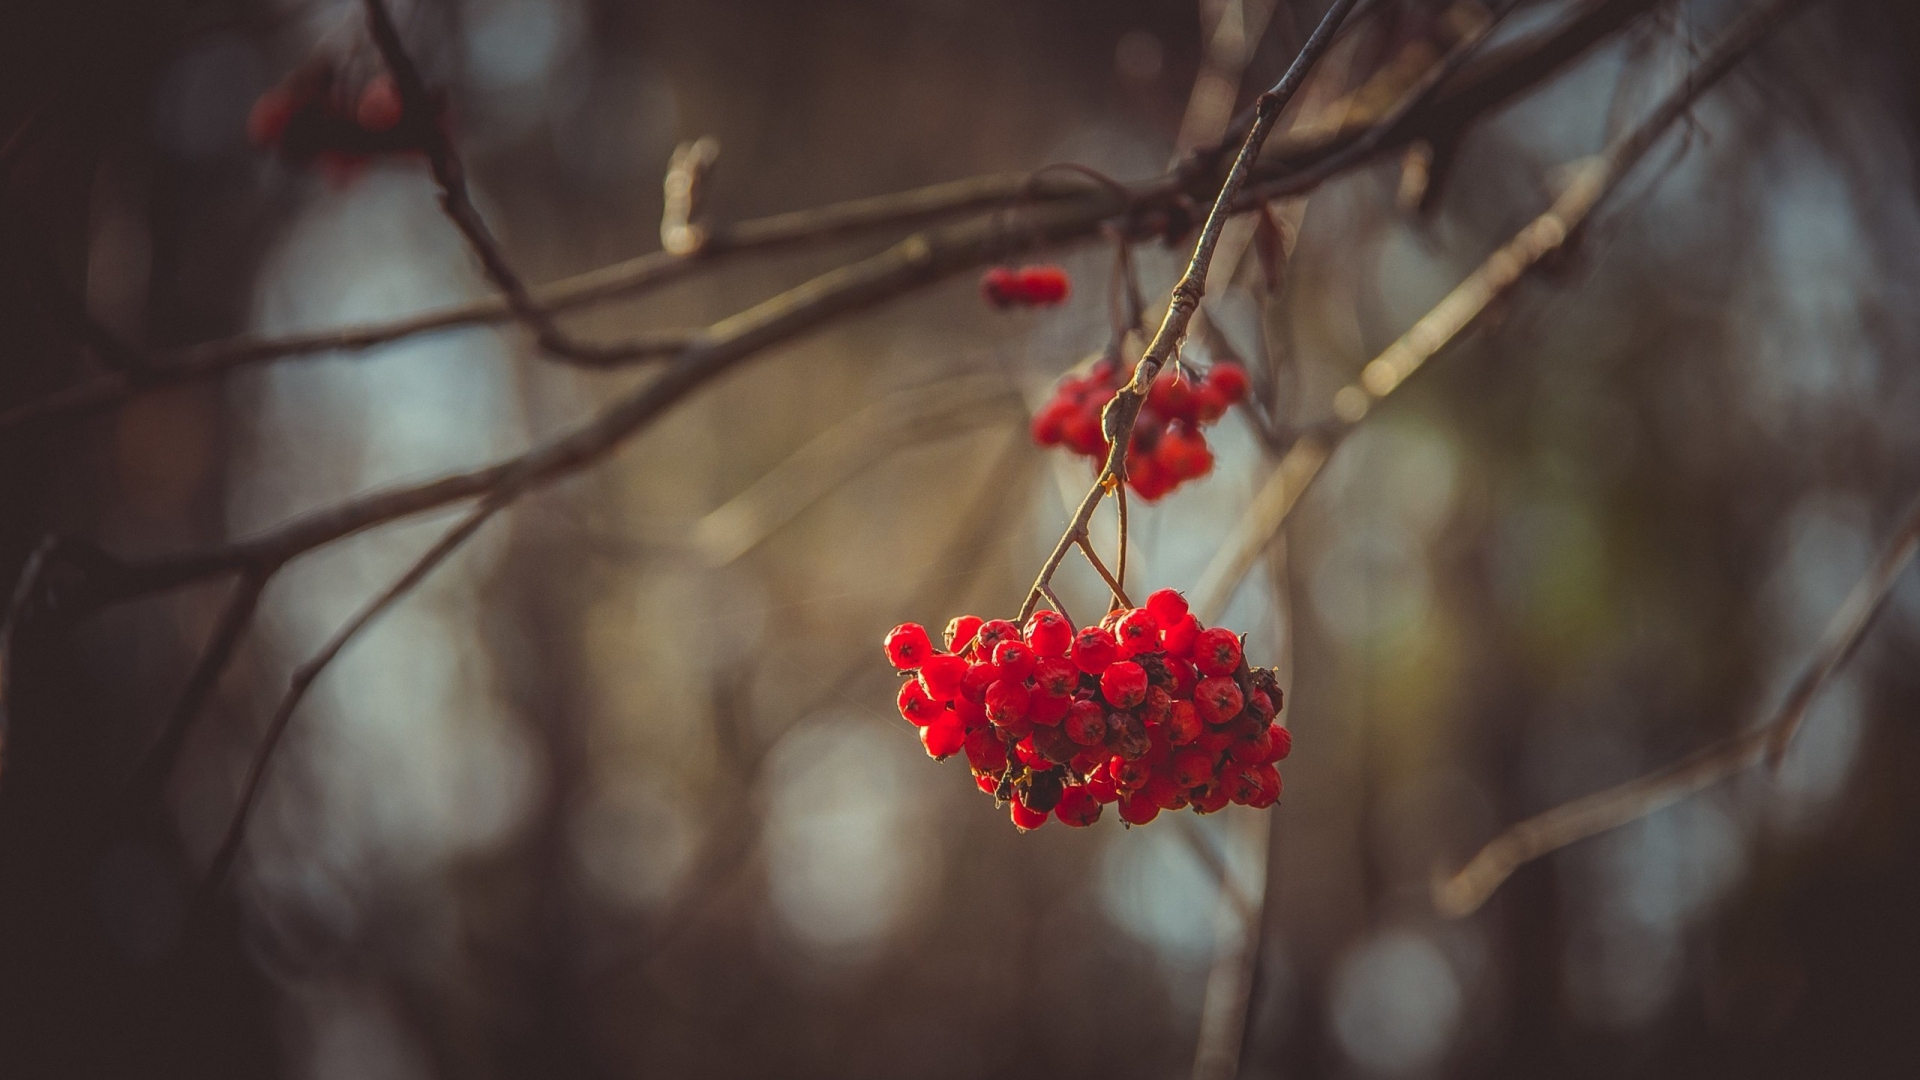 Mountain Ash Berries for 1920 x 1080 HDTV 1080p resolution